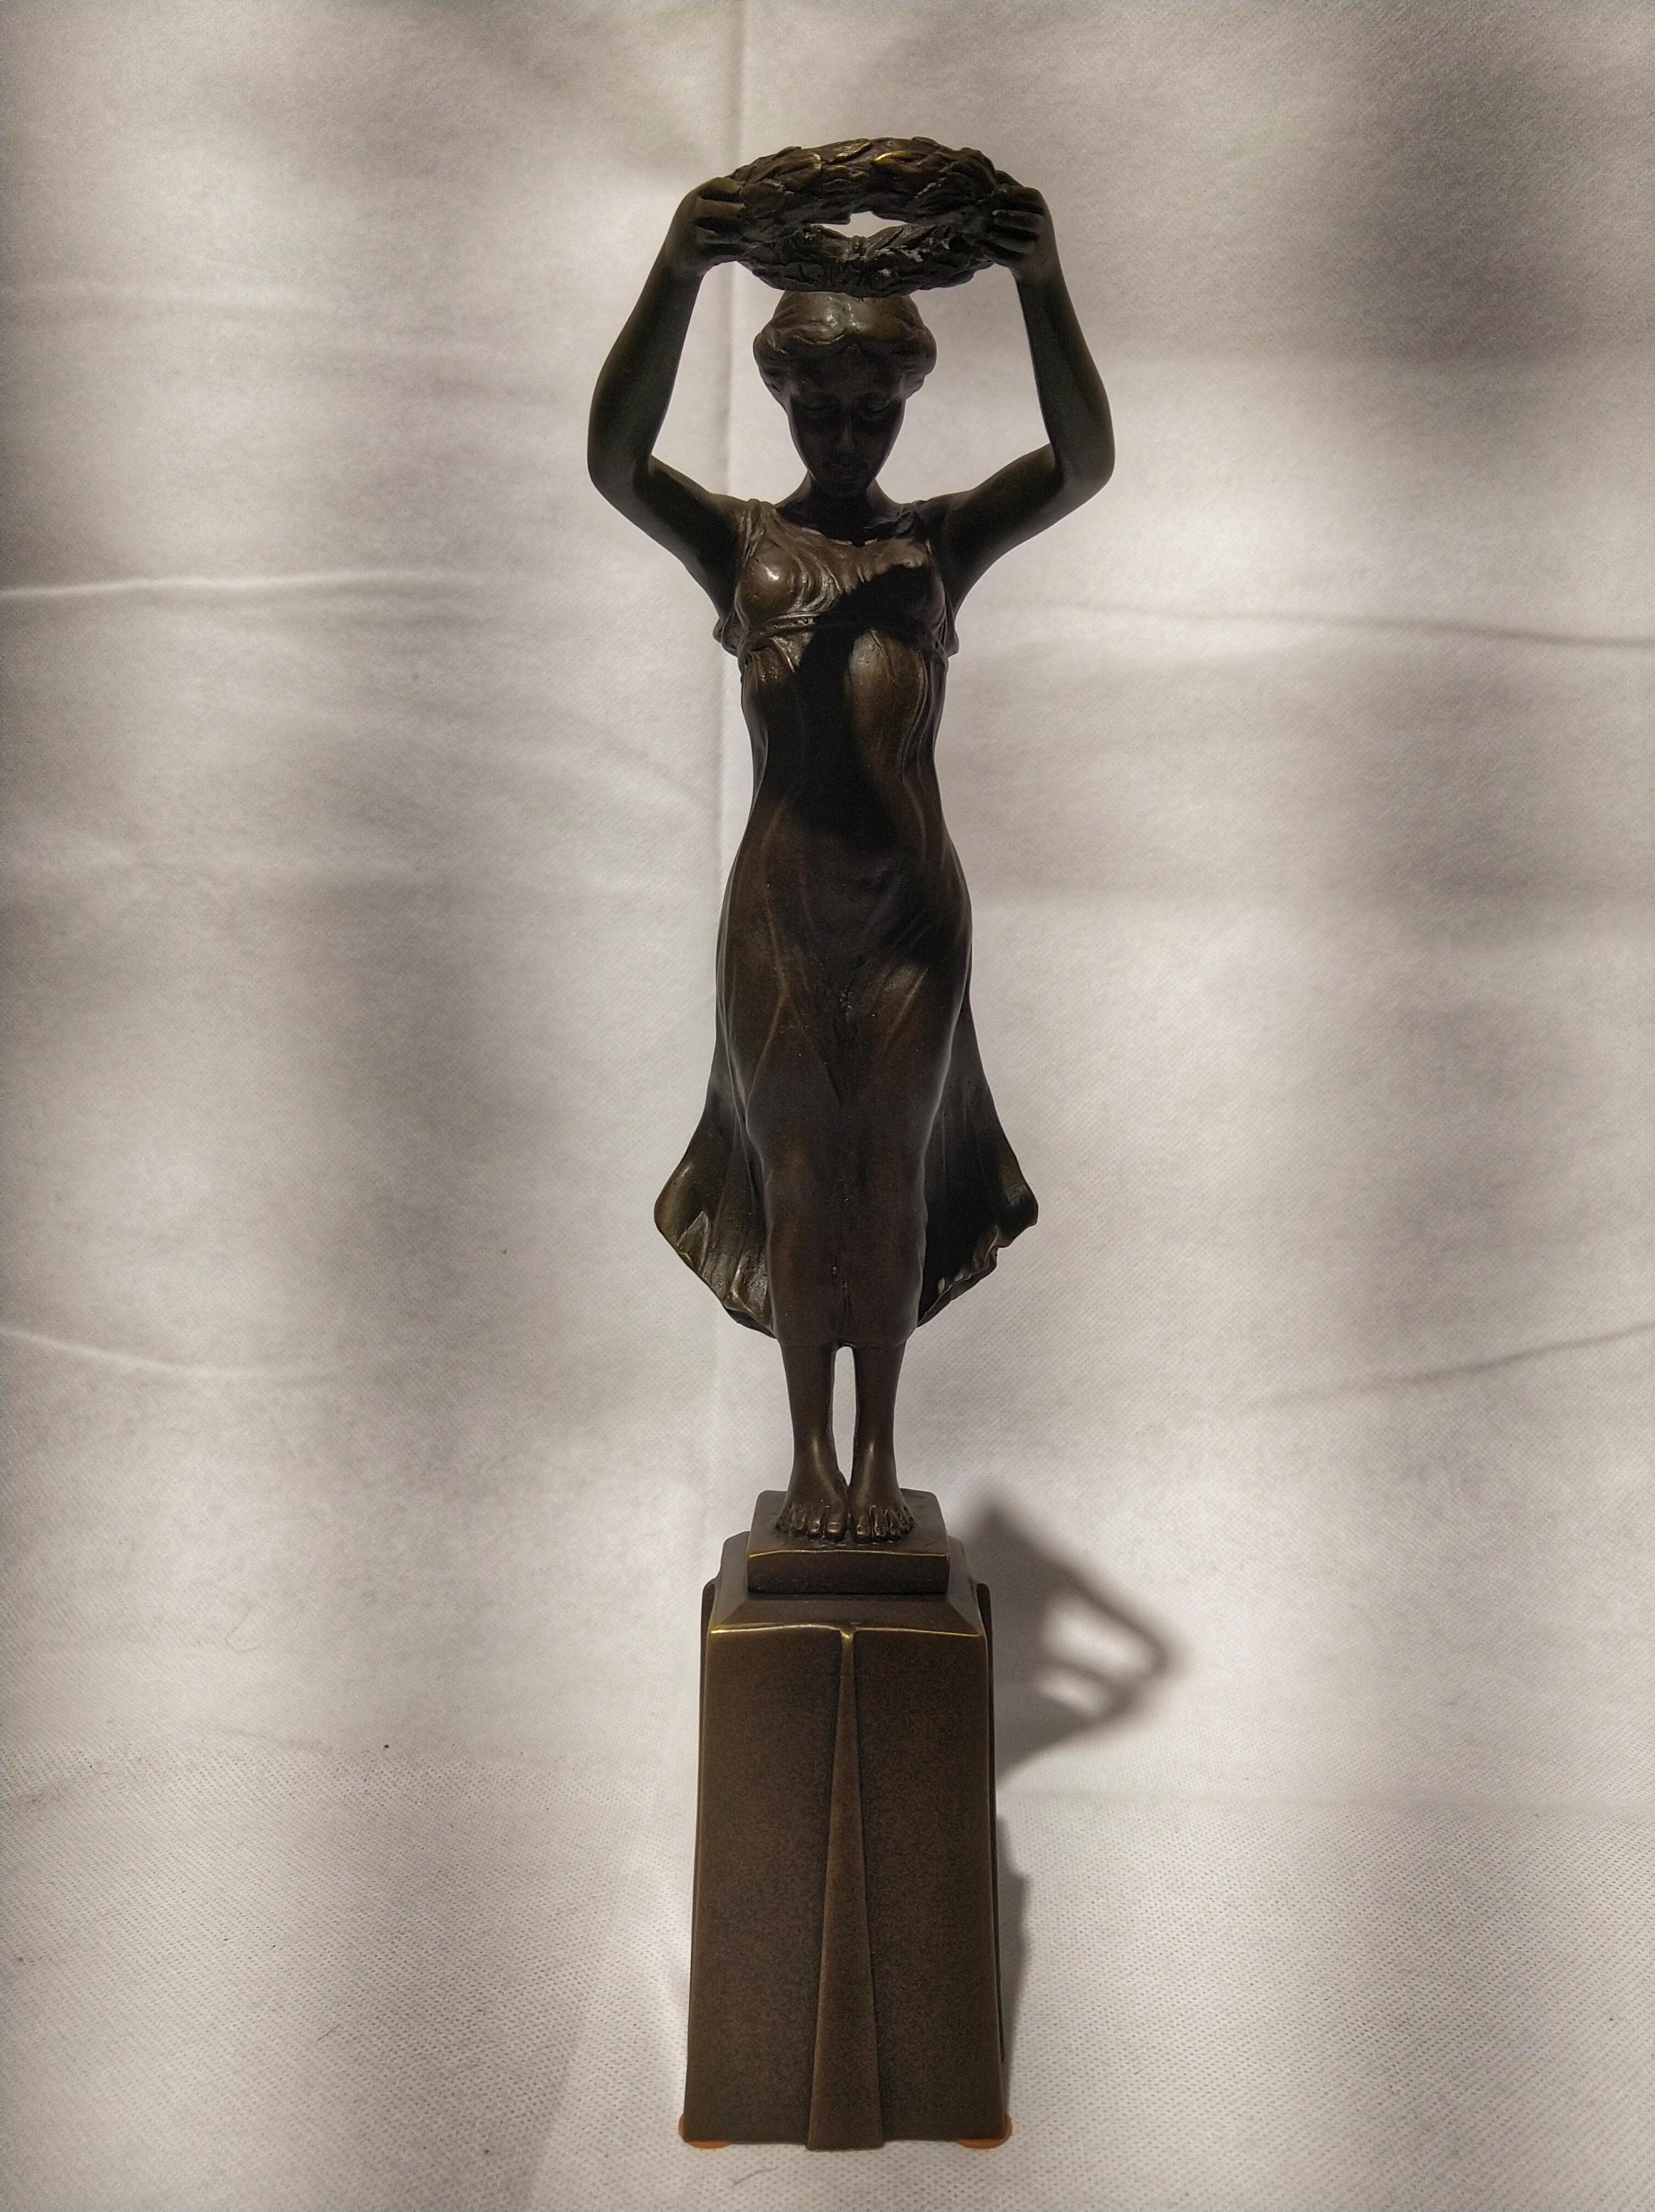 Beautiful Art Deco style sculpture, depicting the nimph Daphne with a laurel crown in his hands that it was given as a prize to the winners of the competitions.

Daphne a minor figure in Greek mythology, is a naiad, a variety of female nymph